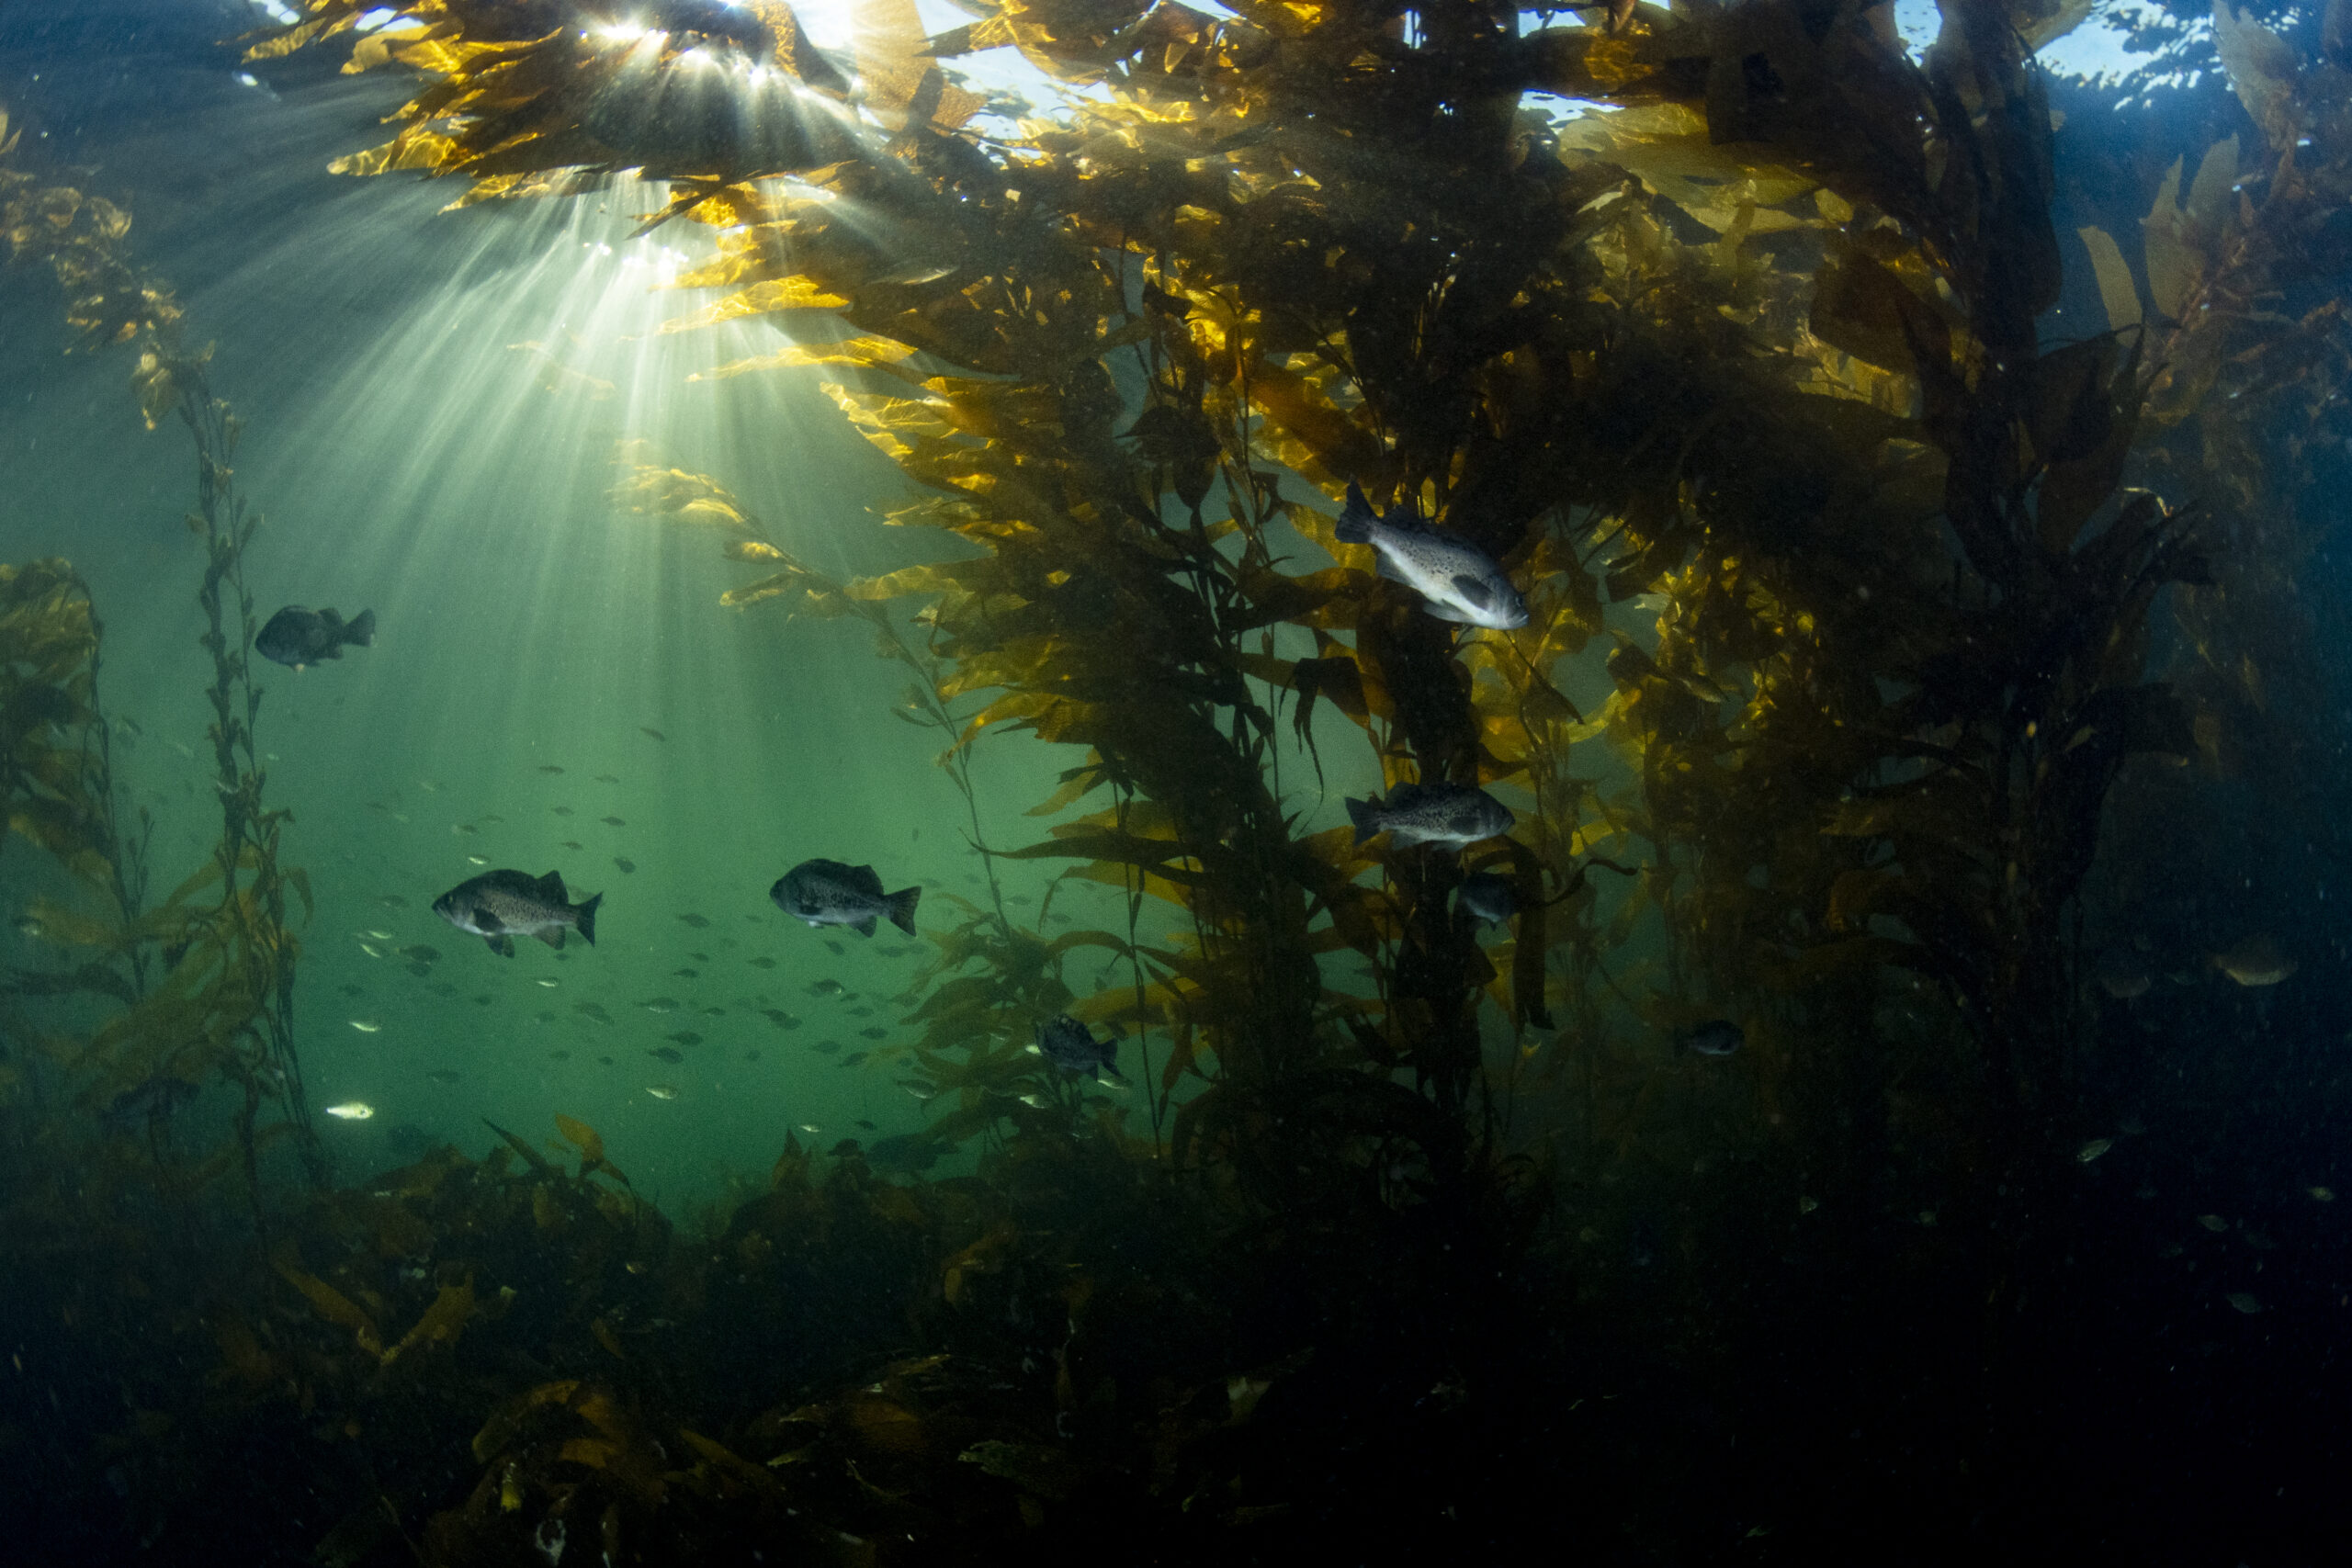 Black rock fish are seen swimming in a kelp forest as sunlight streams through the water.